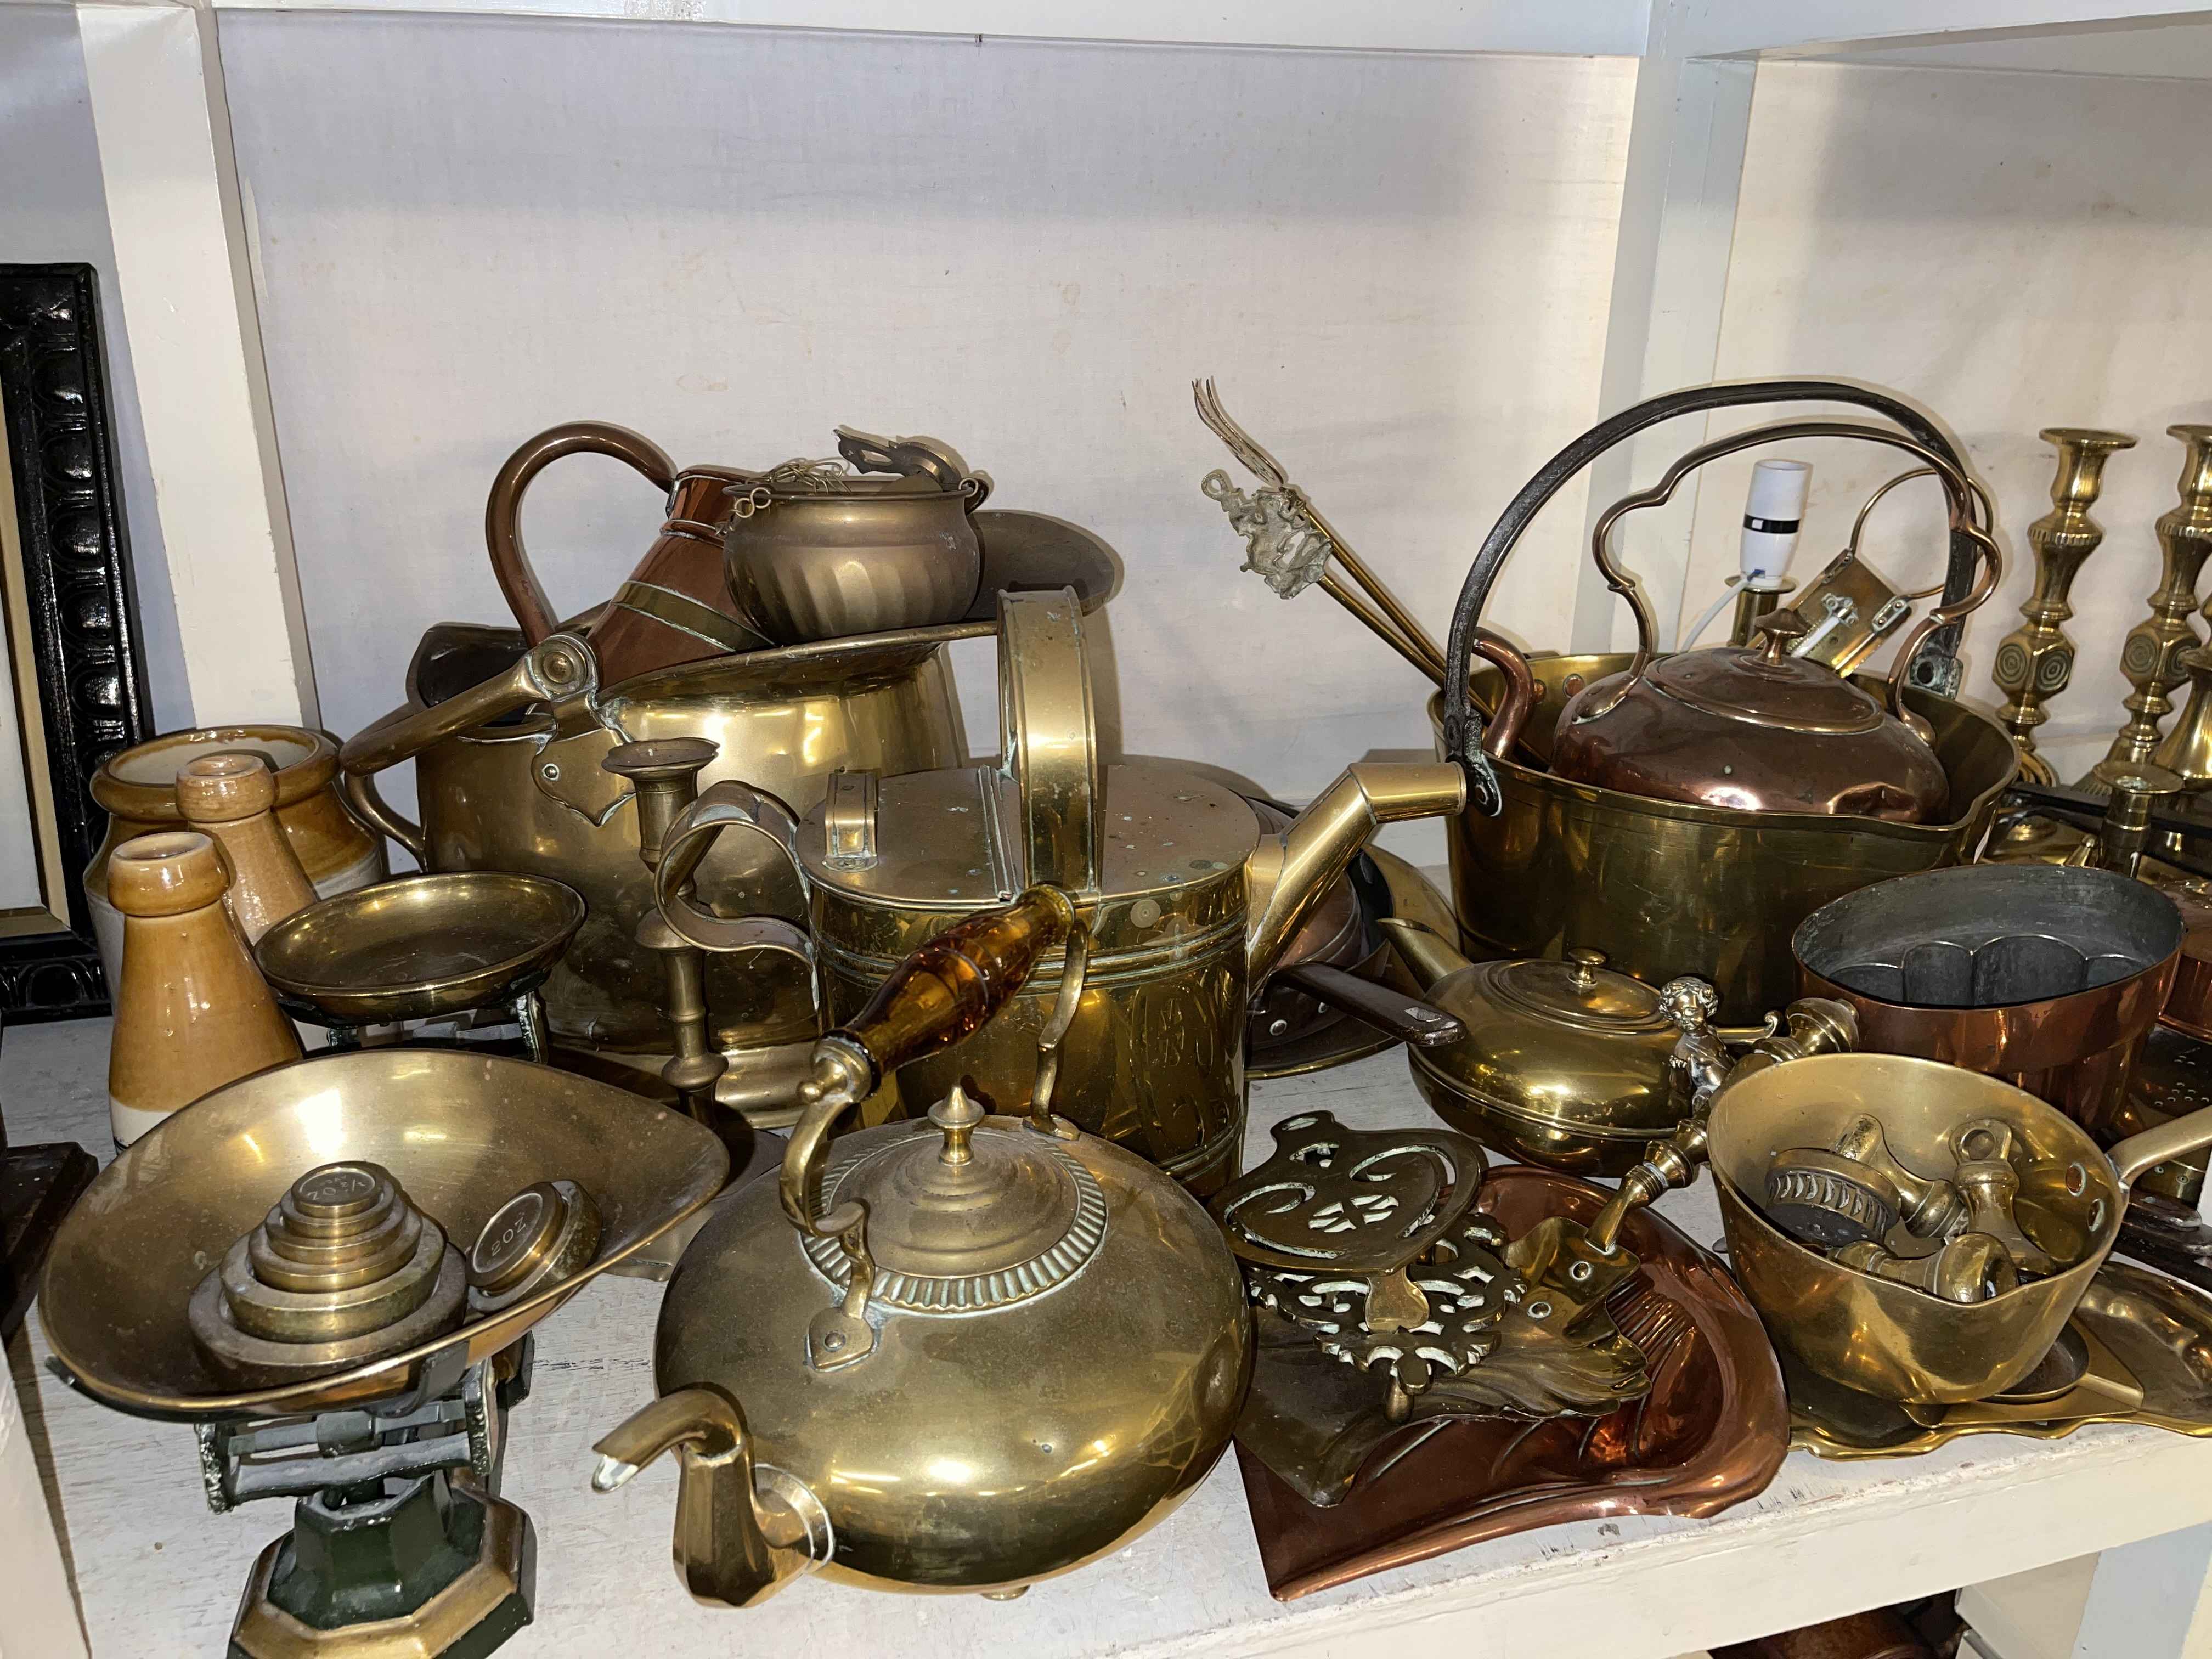 Collection of brass and copper wares including candle holders, scales with weights, jam pan, - Image 2 of 3